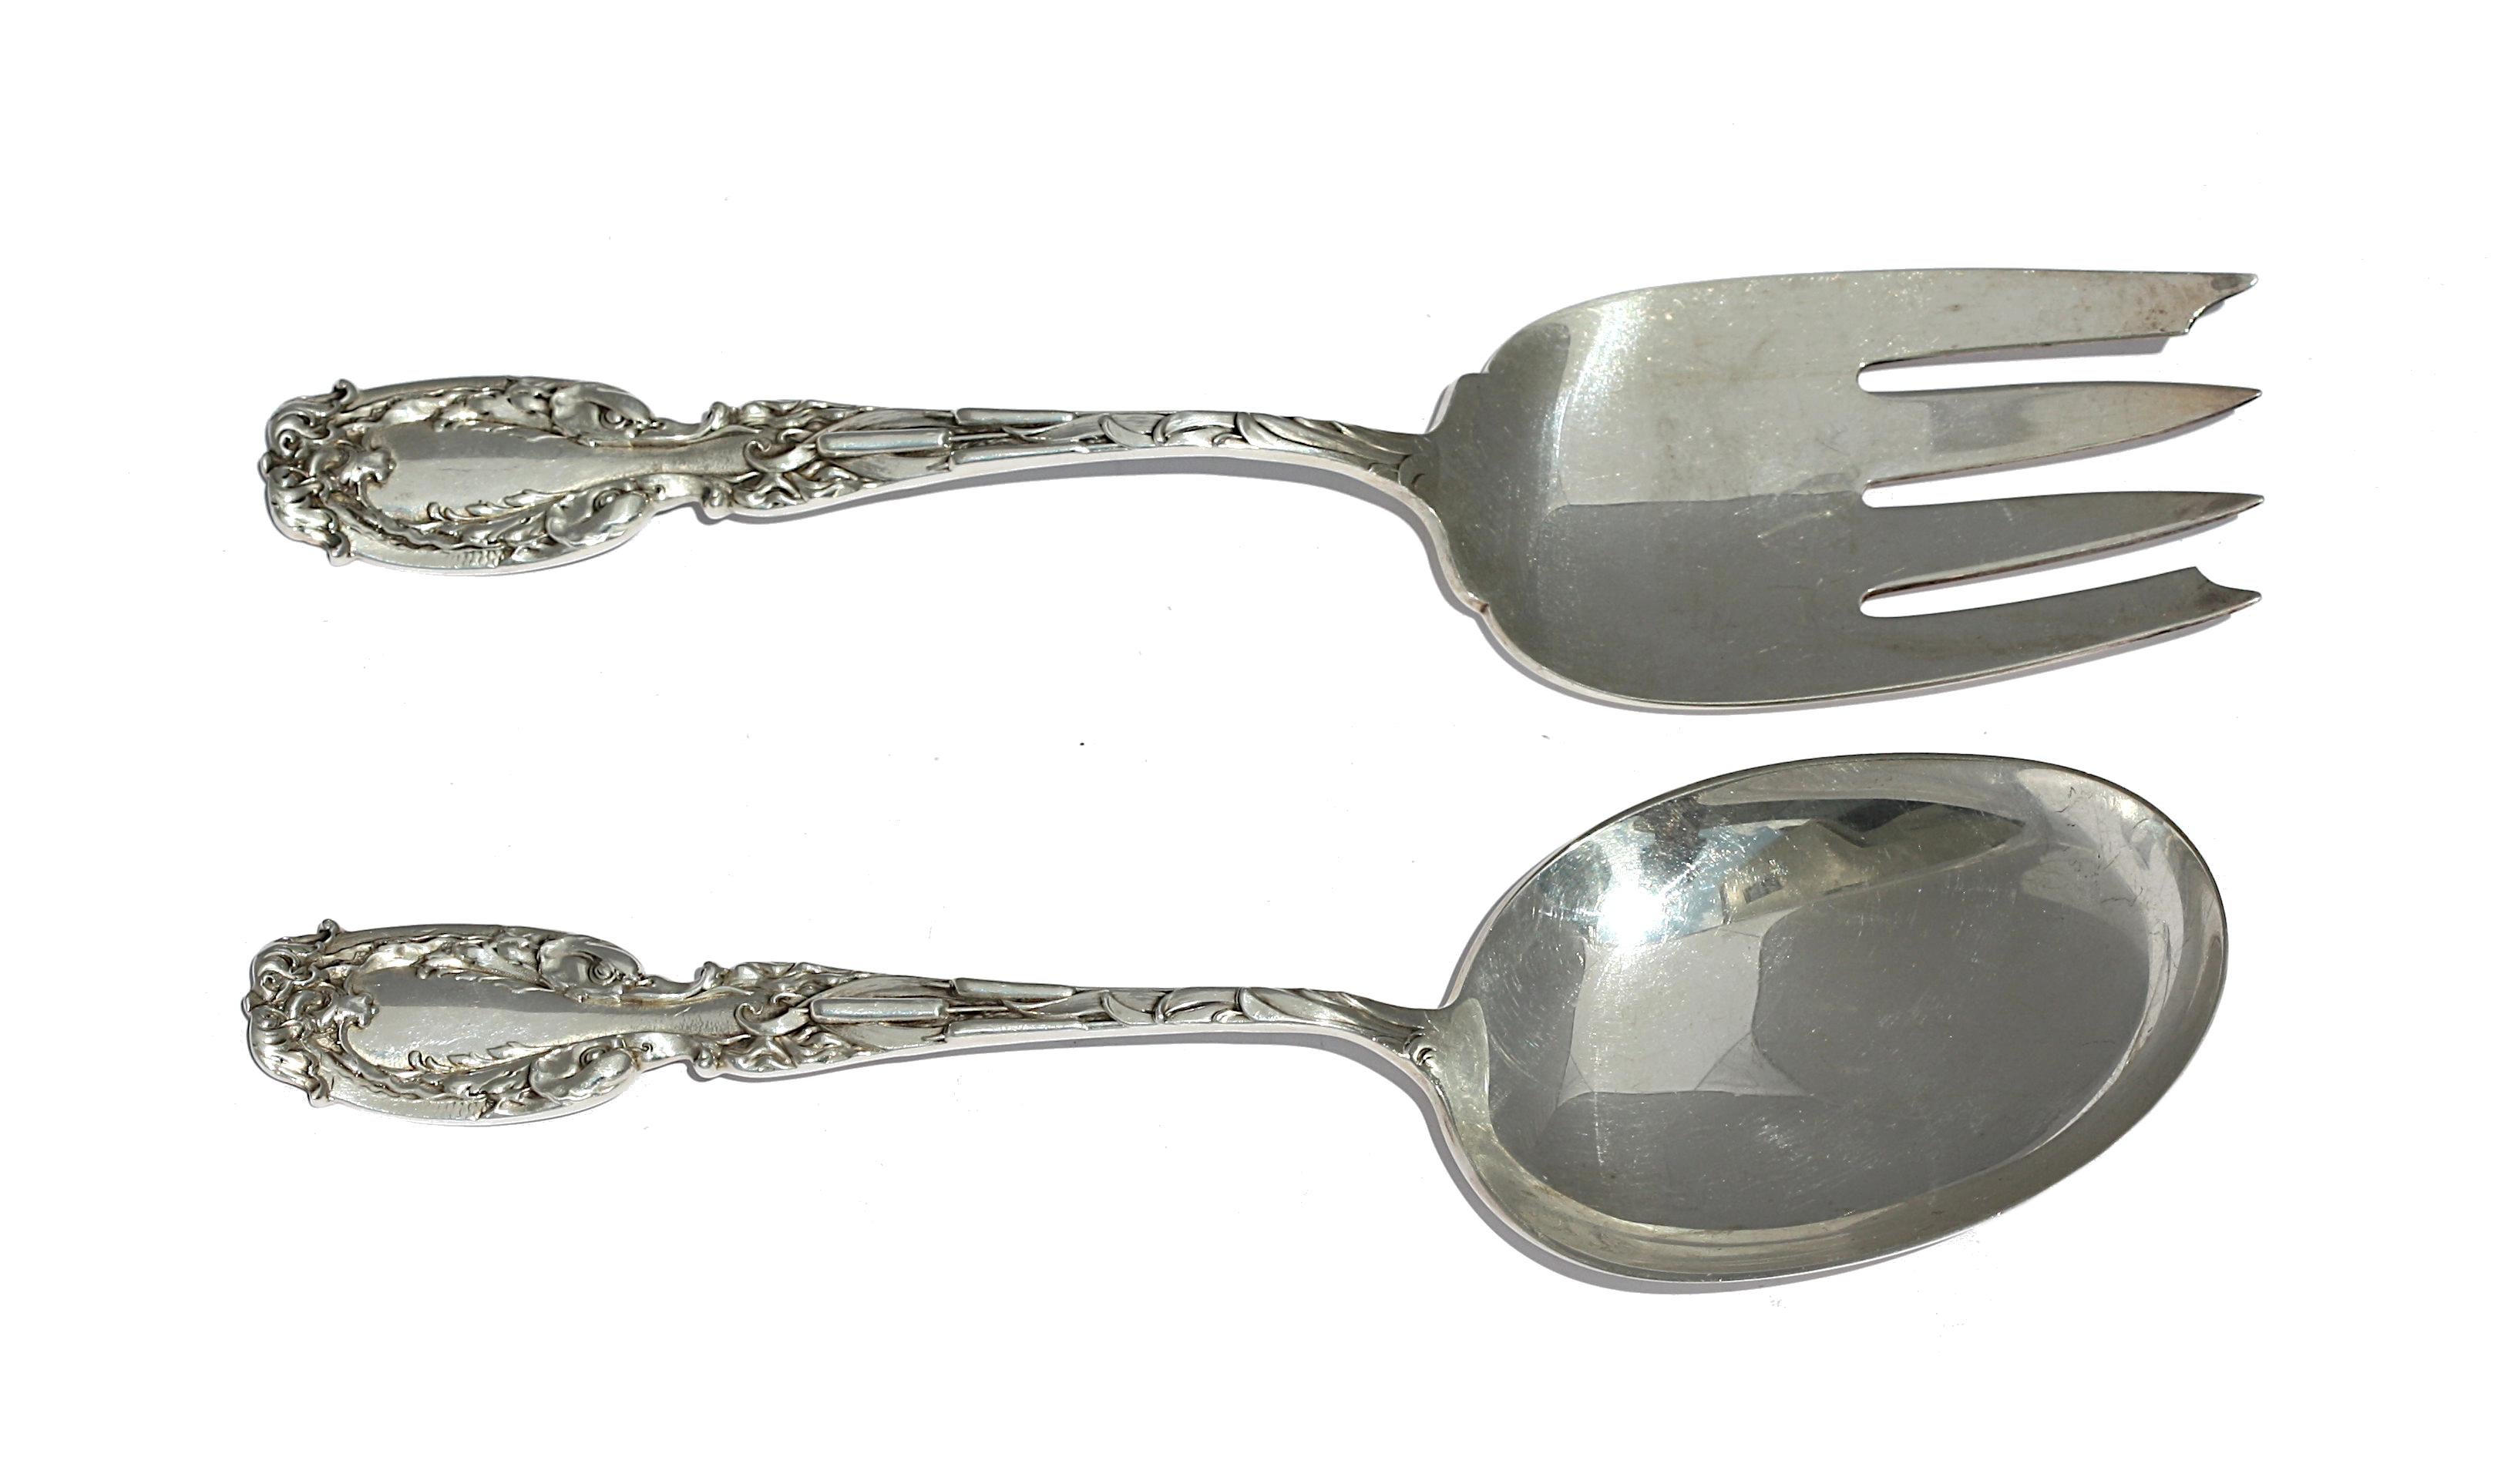 
American Sterling Silver Salad Fork and Spoon
Frank M. Whiting Co., marked Sterling and with manufacturing logo. Each handle chased with foliage and a cattail.
Length 9 in. (22.86 cm.), 7.2 ozt.